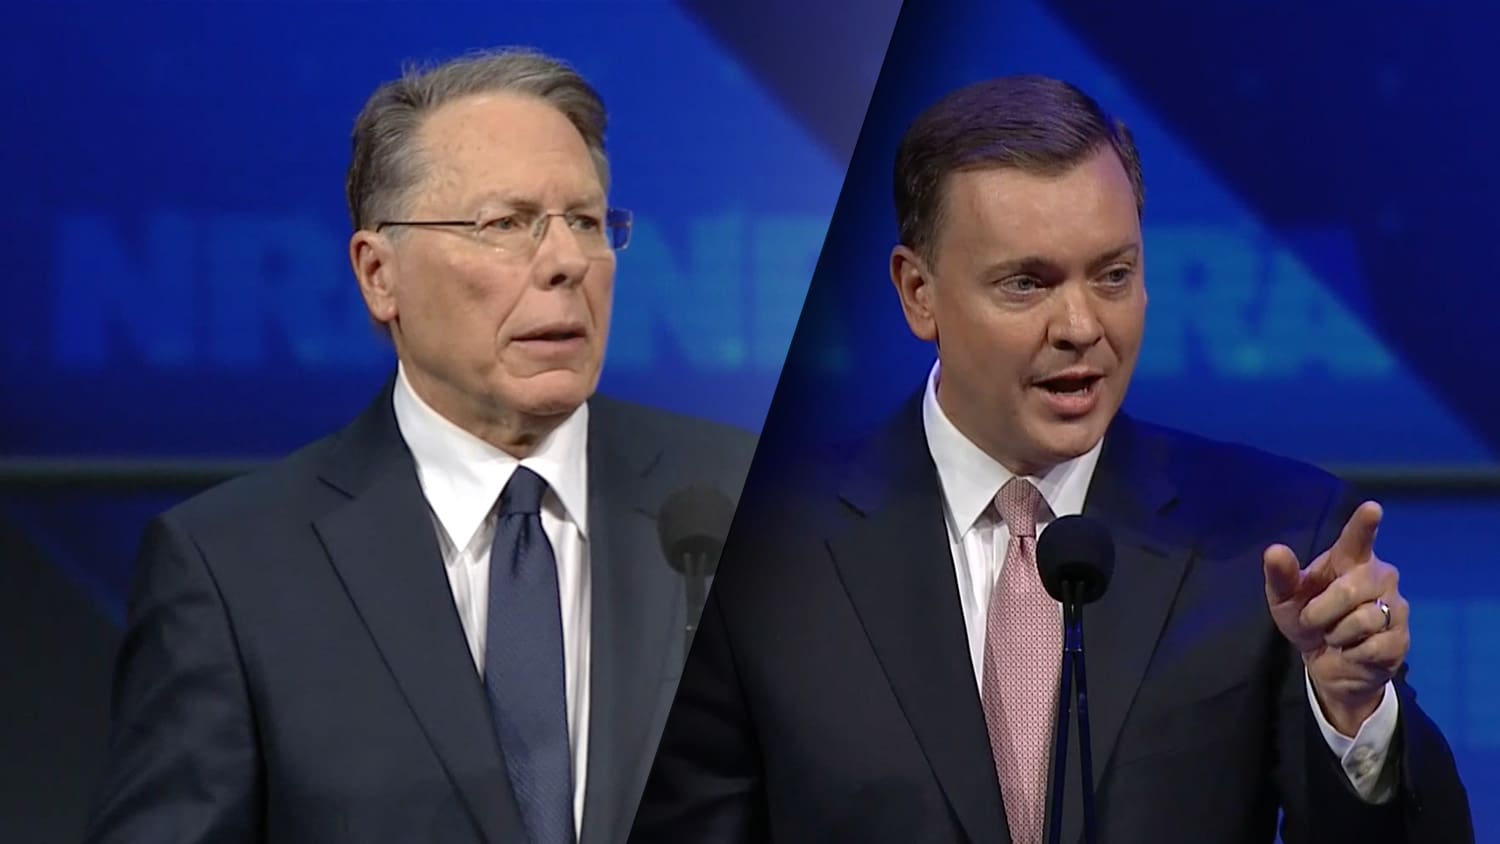 Wayne LaPierre and Chris Cox on the NRA's stance regarding bump fire stocks. courtesy americas1stfreedom.org